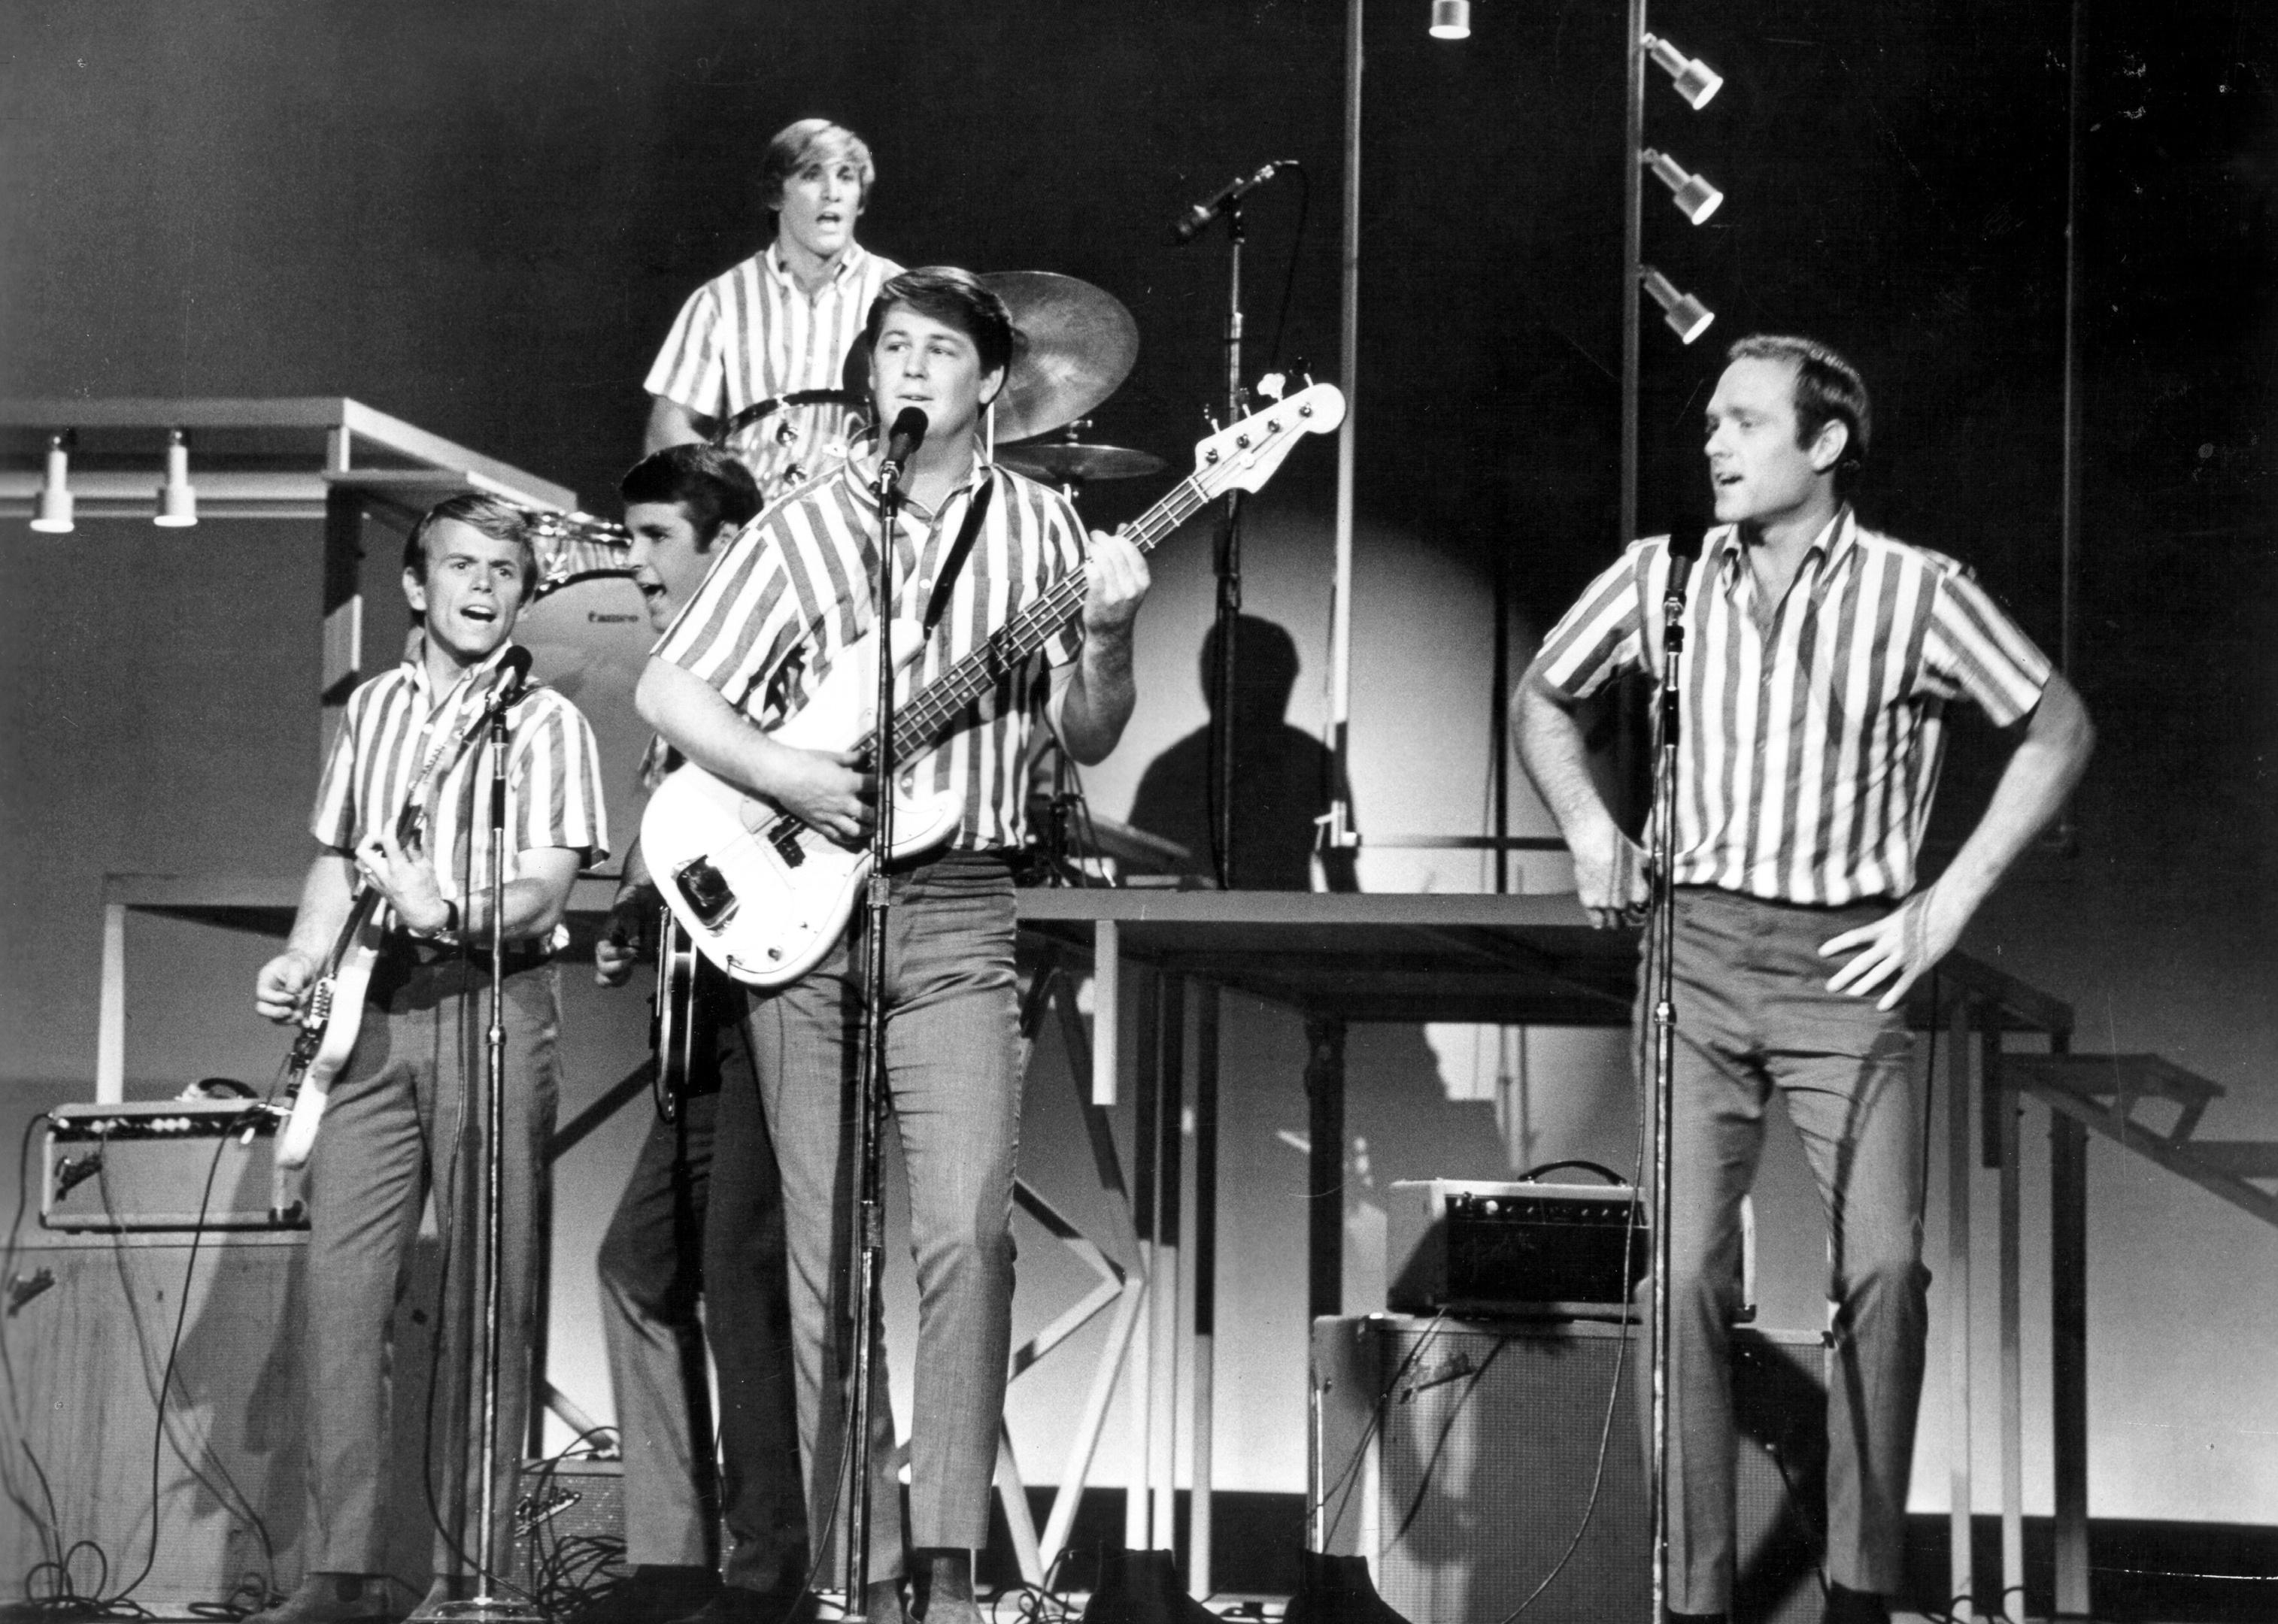 The Beach Boys onstage all dressed in striped shirts.